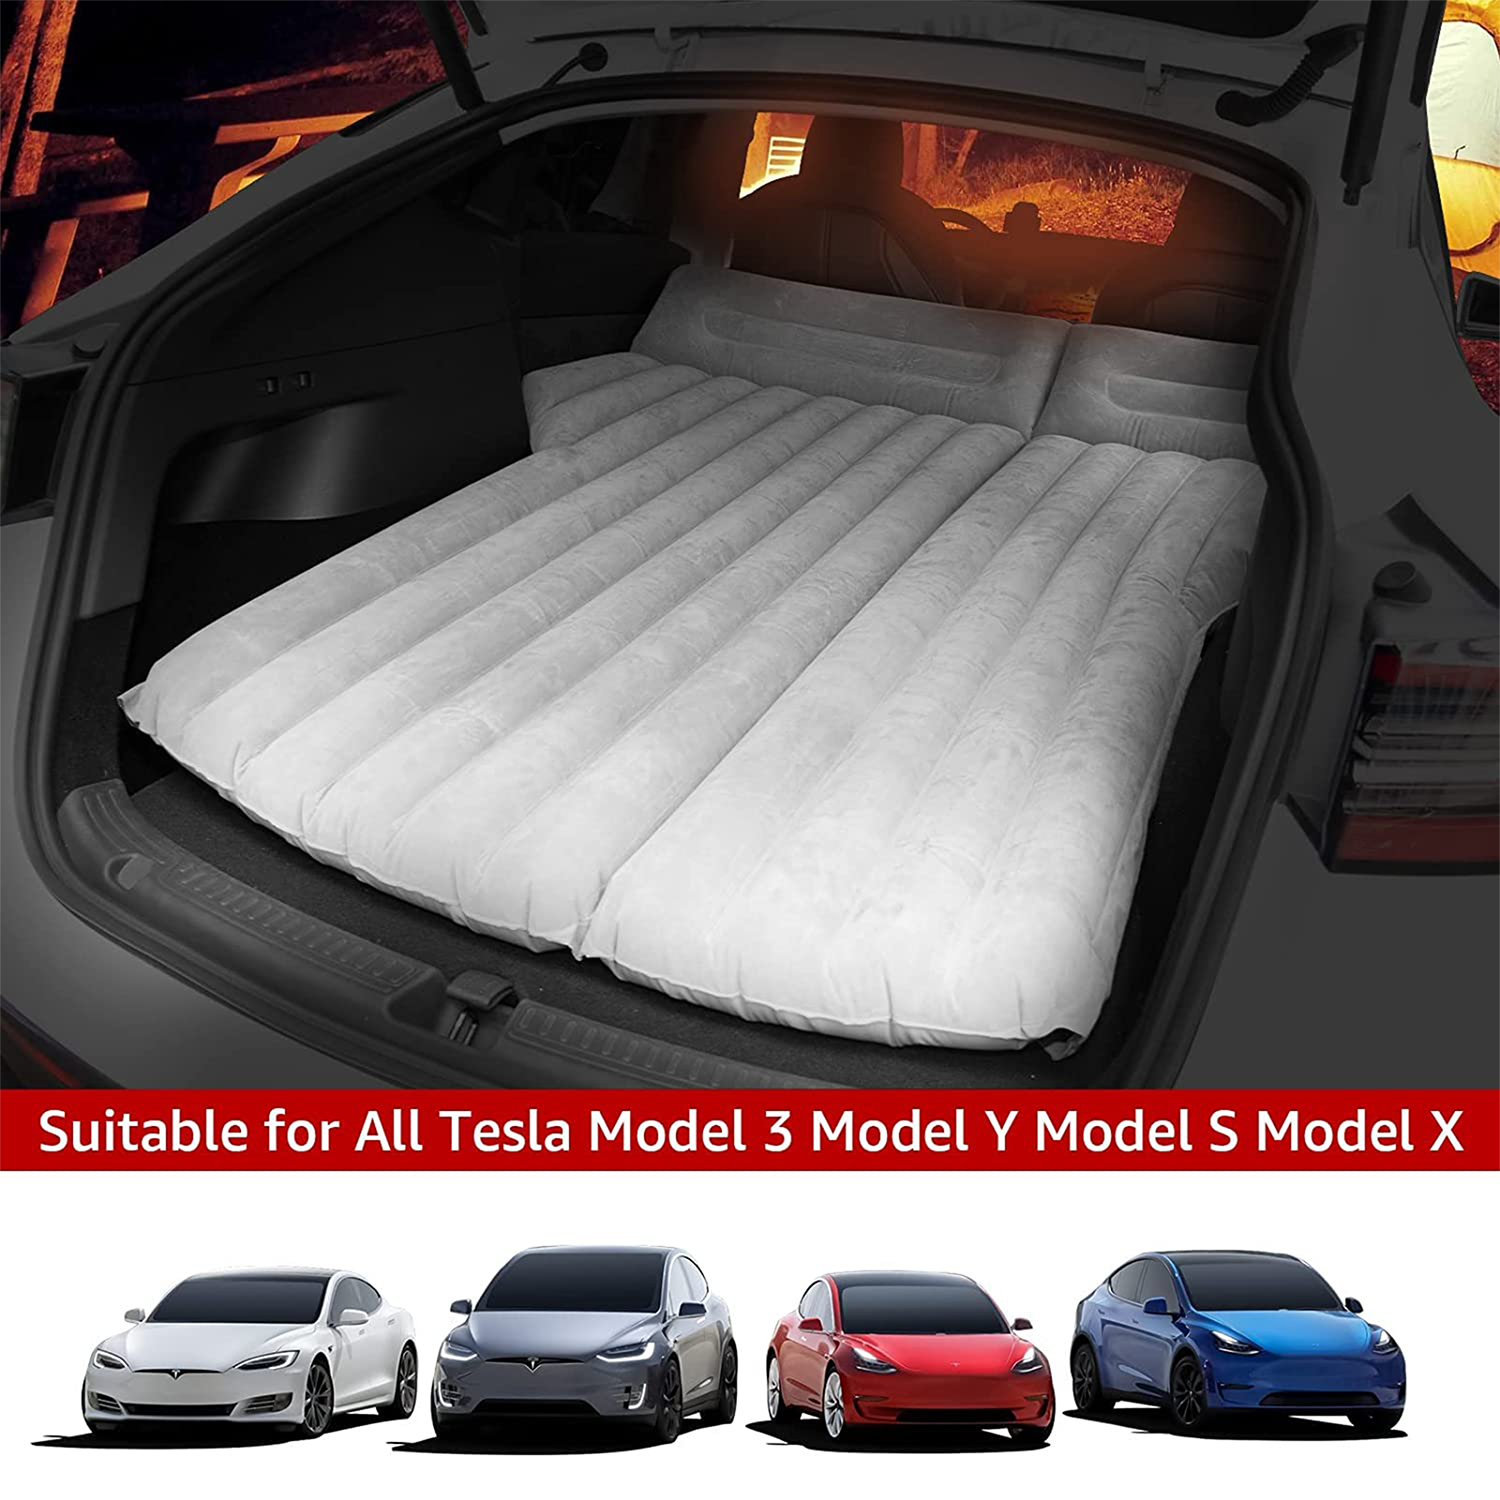 Mattress Portable Camping Air Bed Cushion Inflatable For Tesla Model Y US